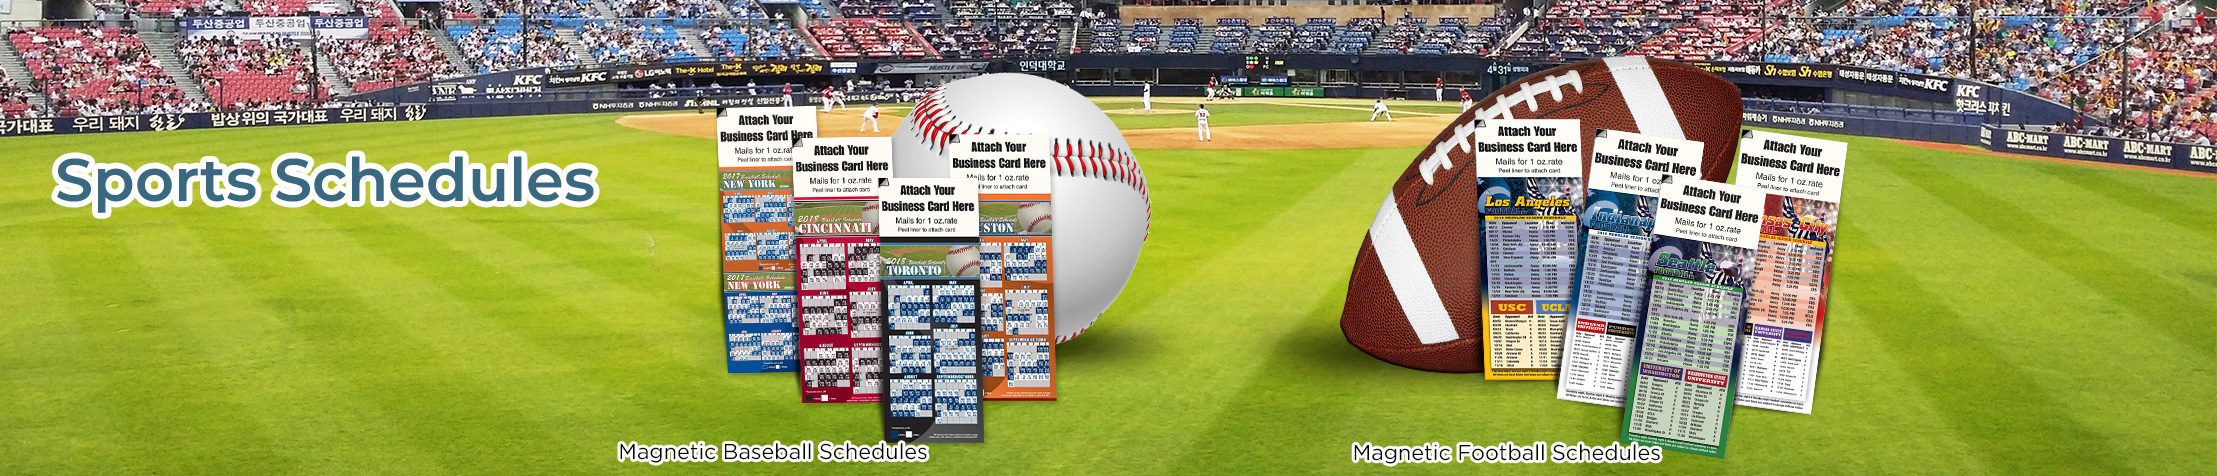 Realty South Real Estate Sports Schedules - Realty South custom sports schedule magnets | BestPrintBuy.com